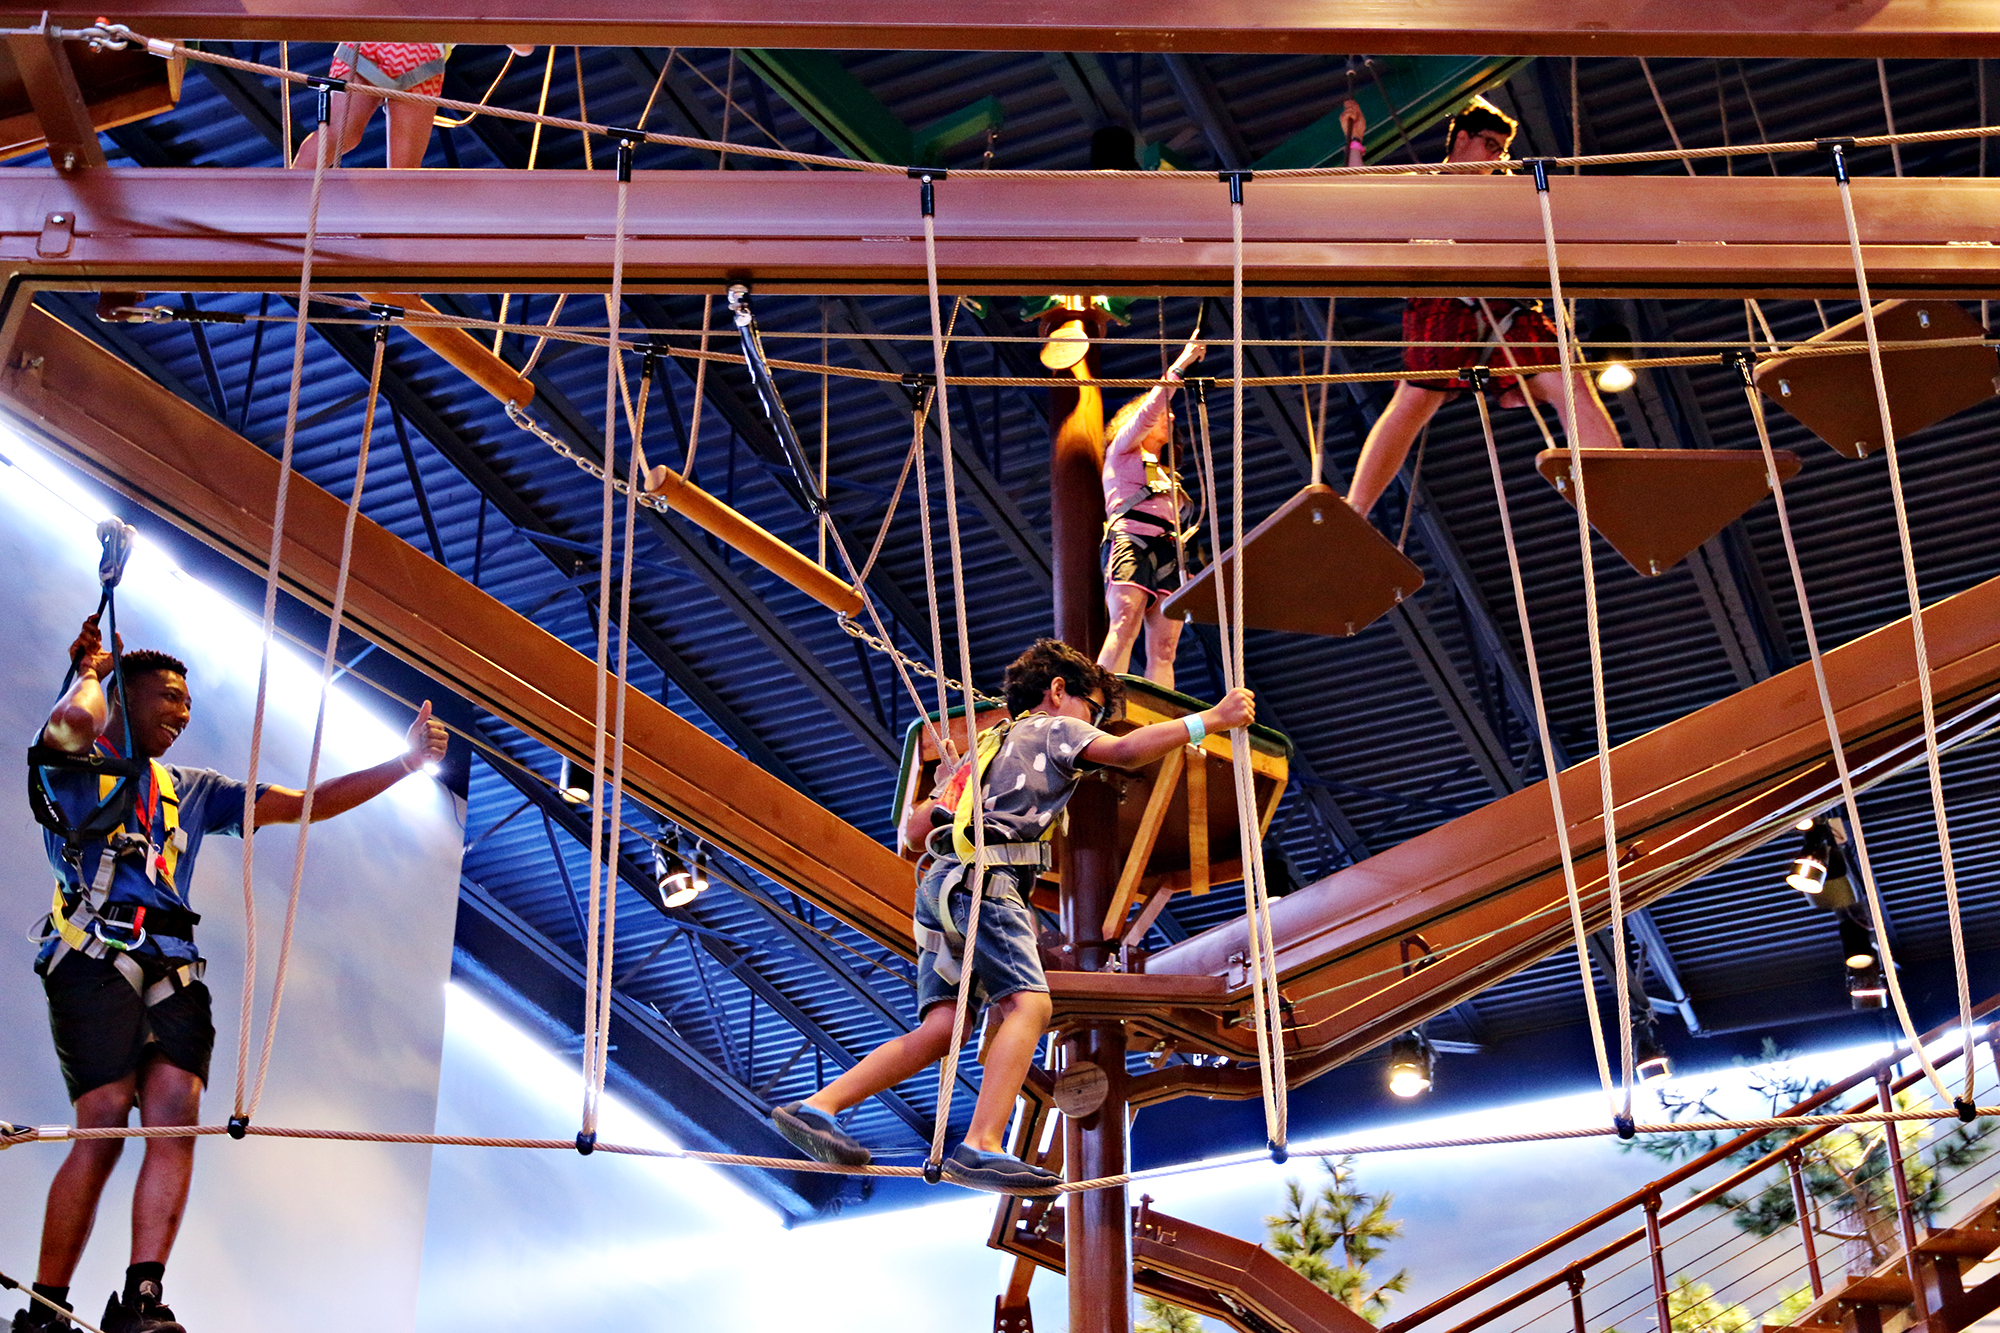 There is so much to do for the entire family at Great Wolf Lodge.